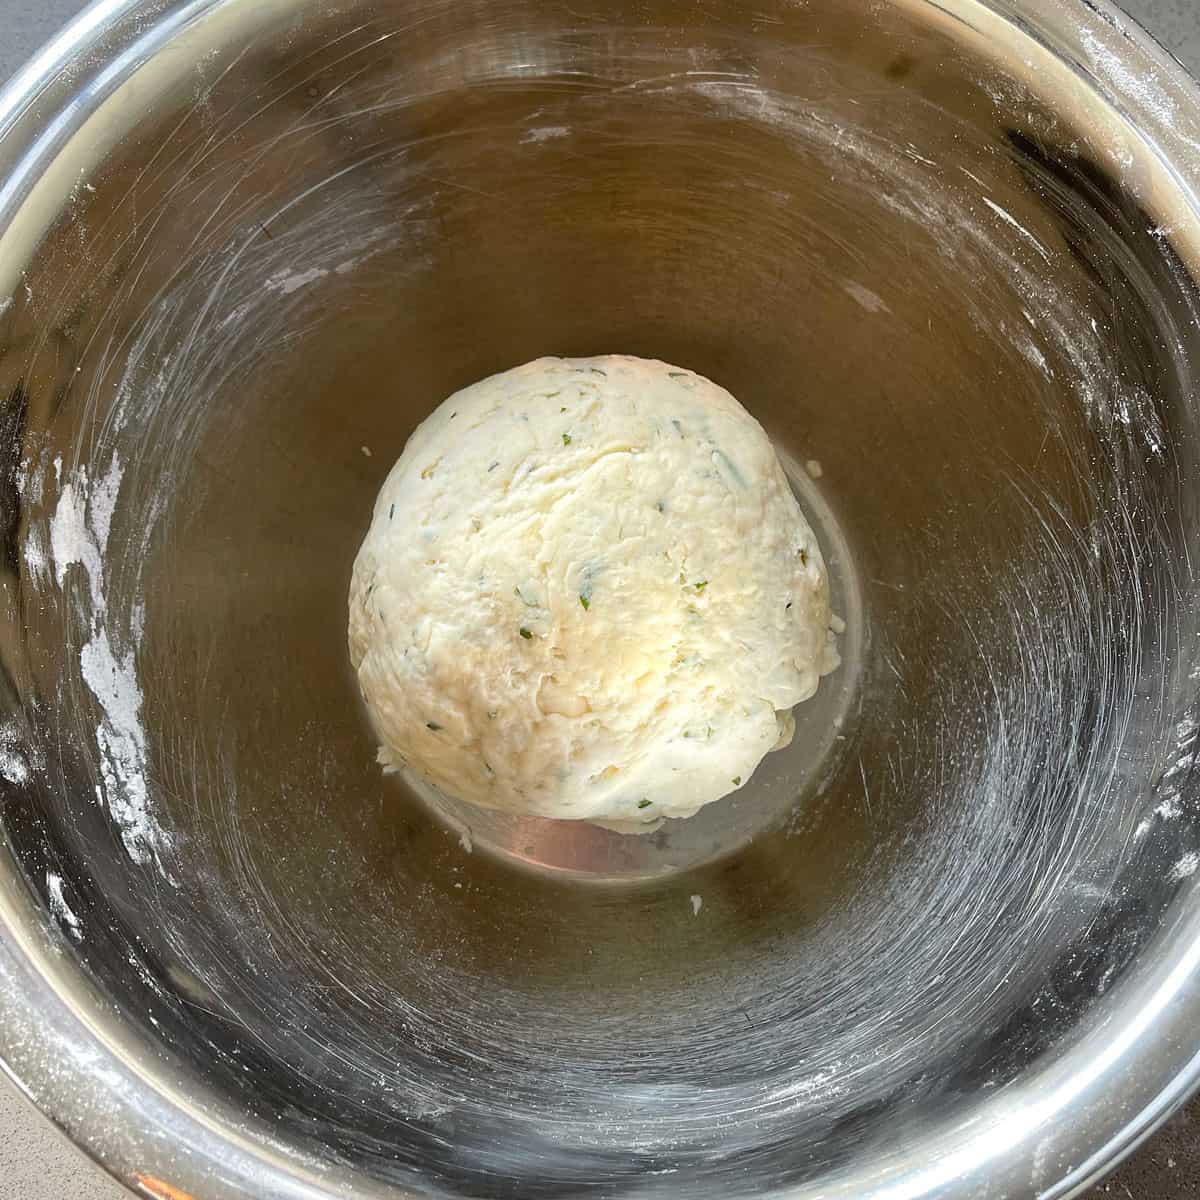 Scone dough in a stainless steel bowl.